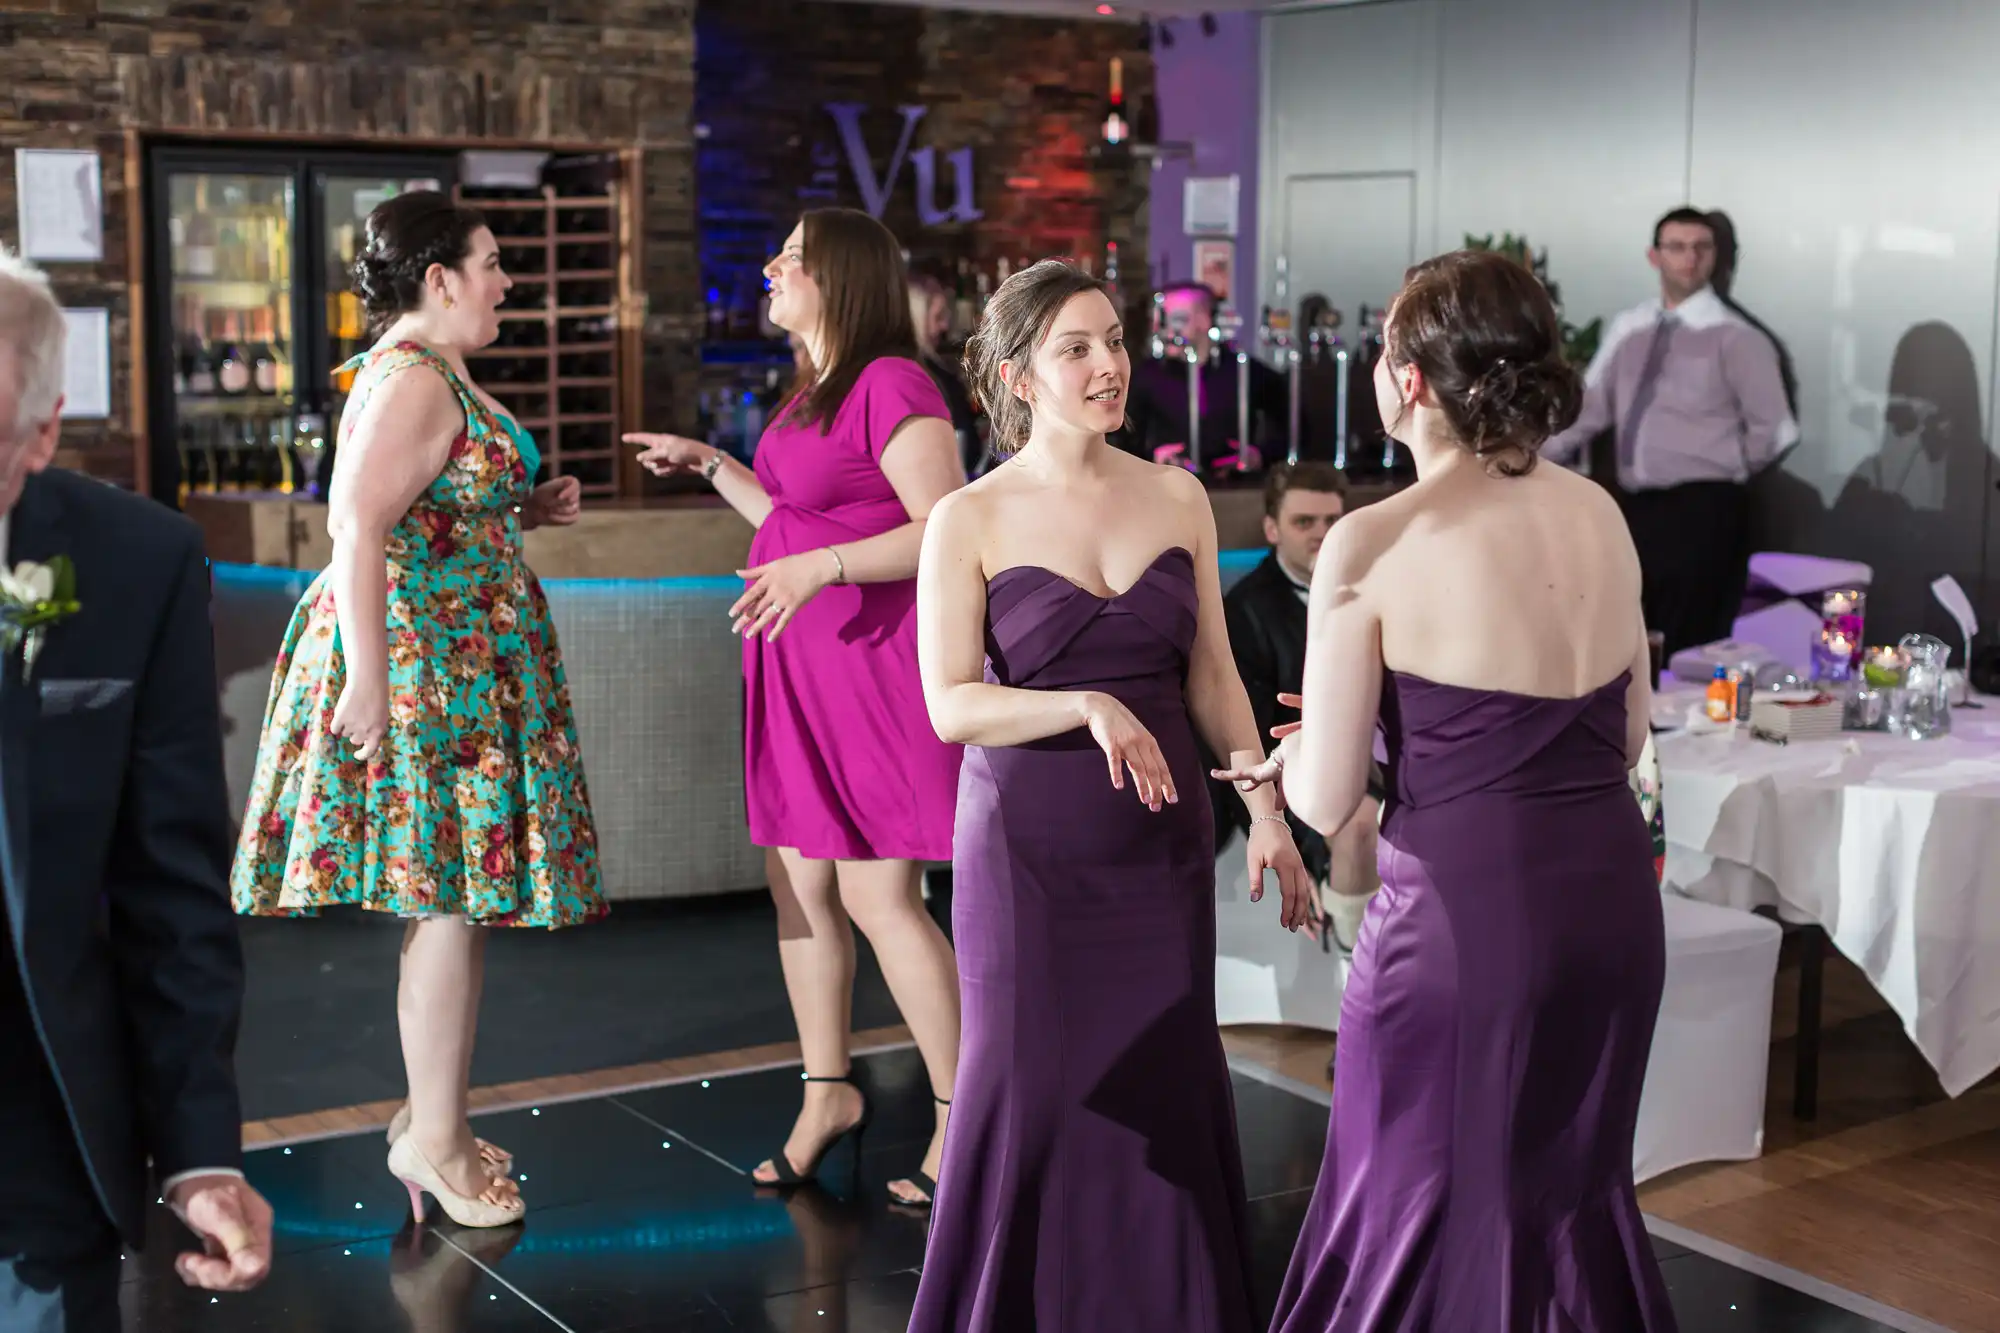 Women in formal attire dancing and conversing at an indoor celebration, with tables and party decorations visible in the background.